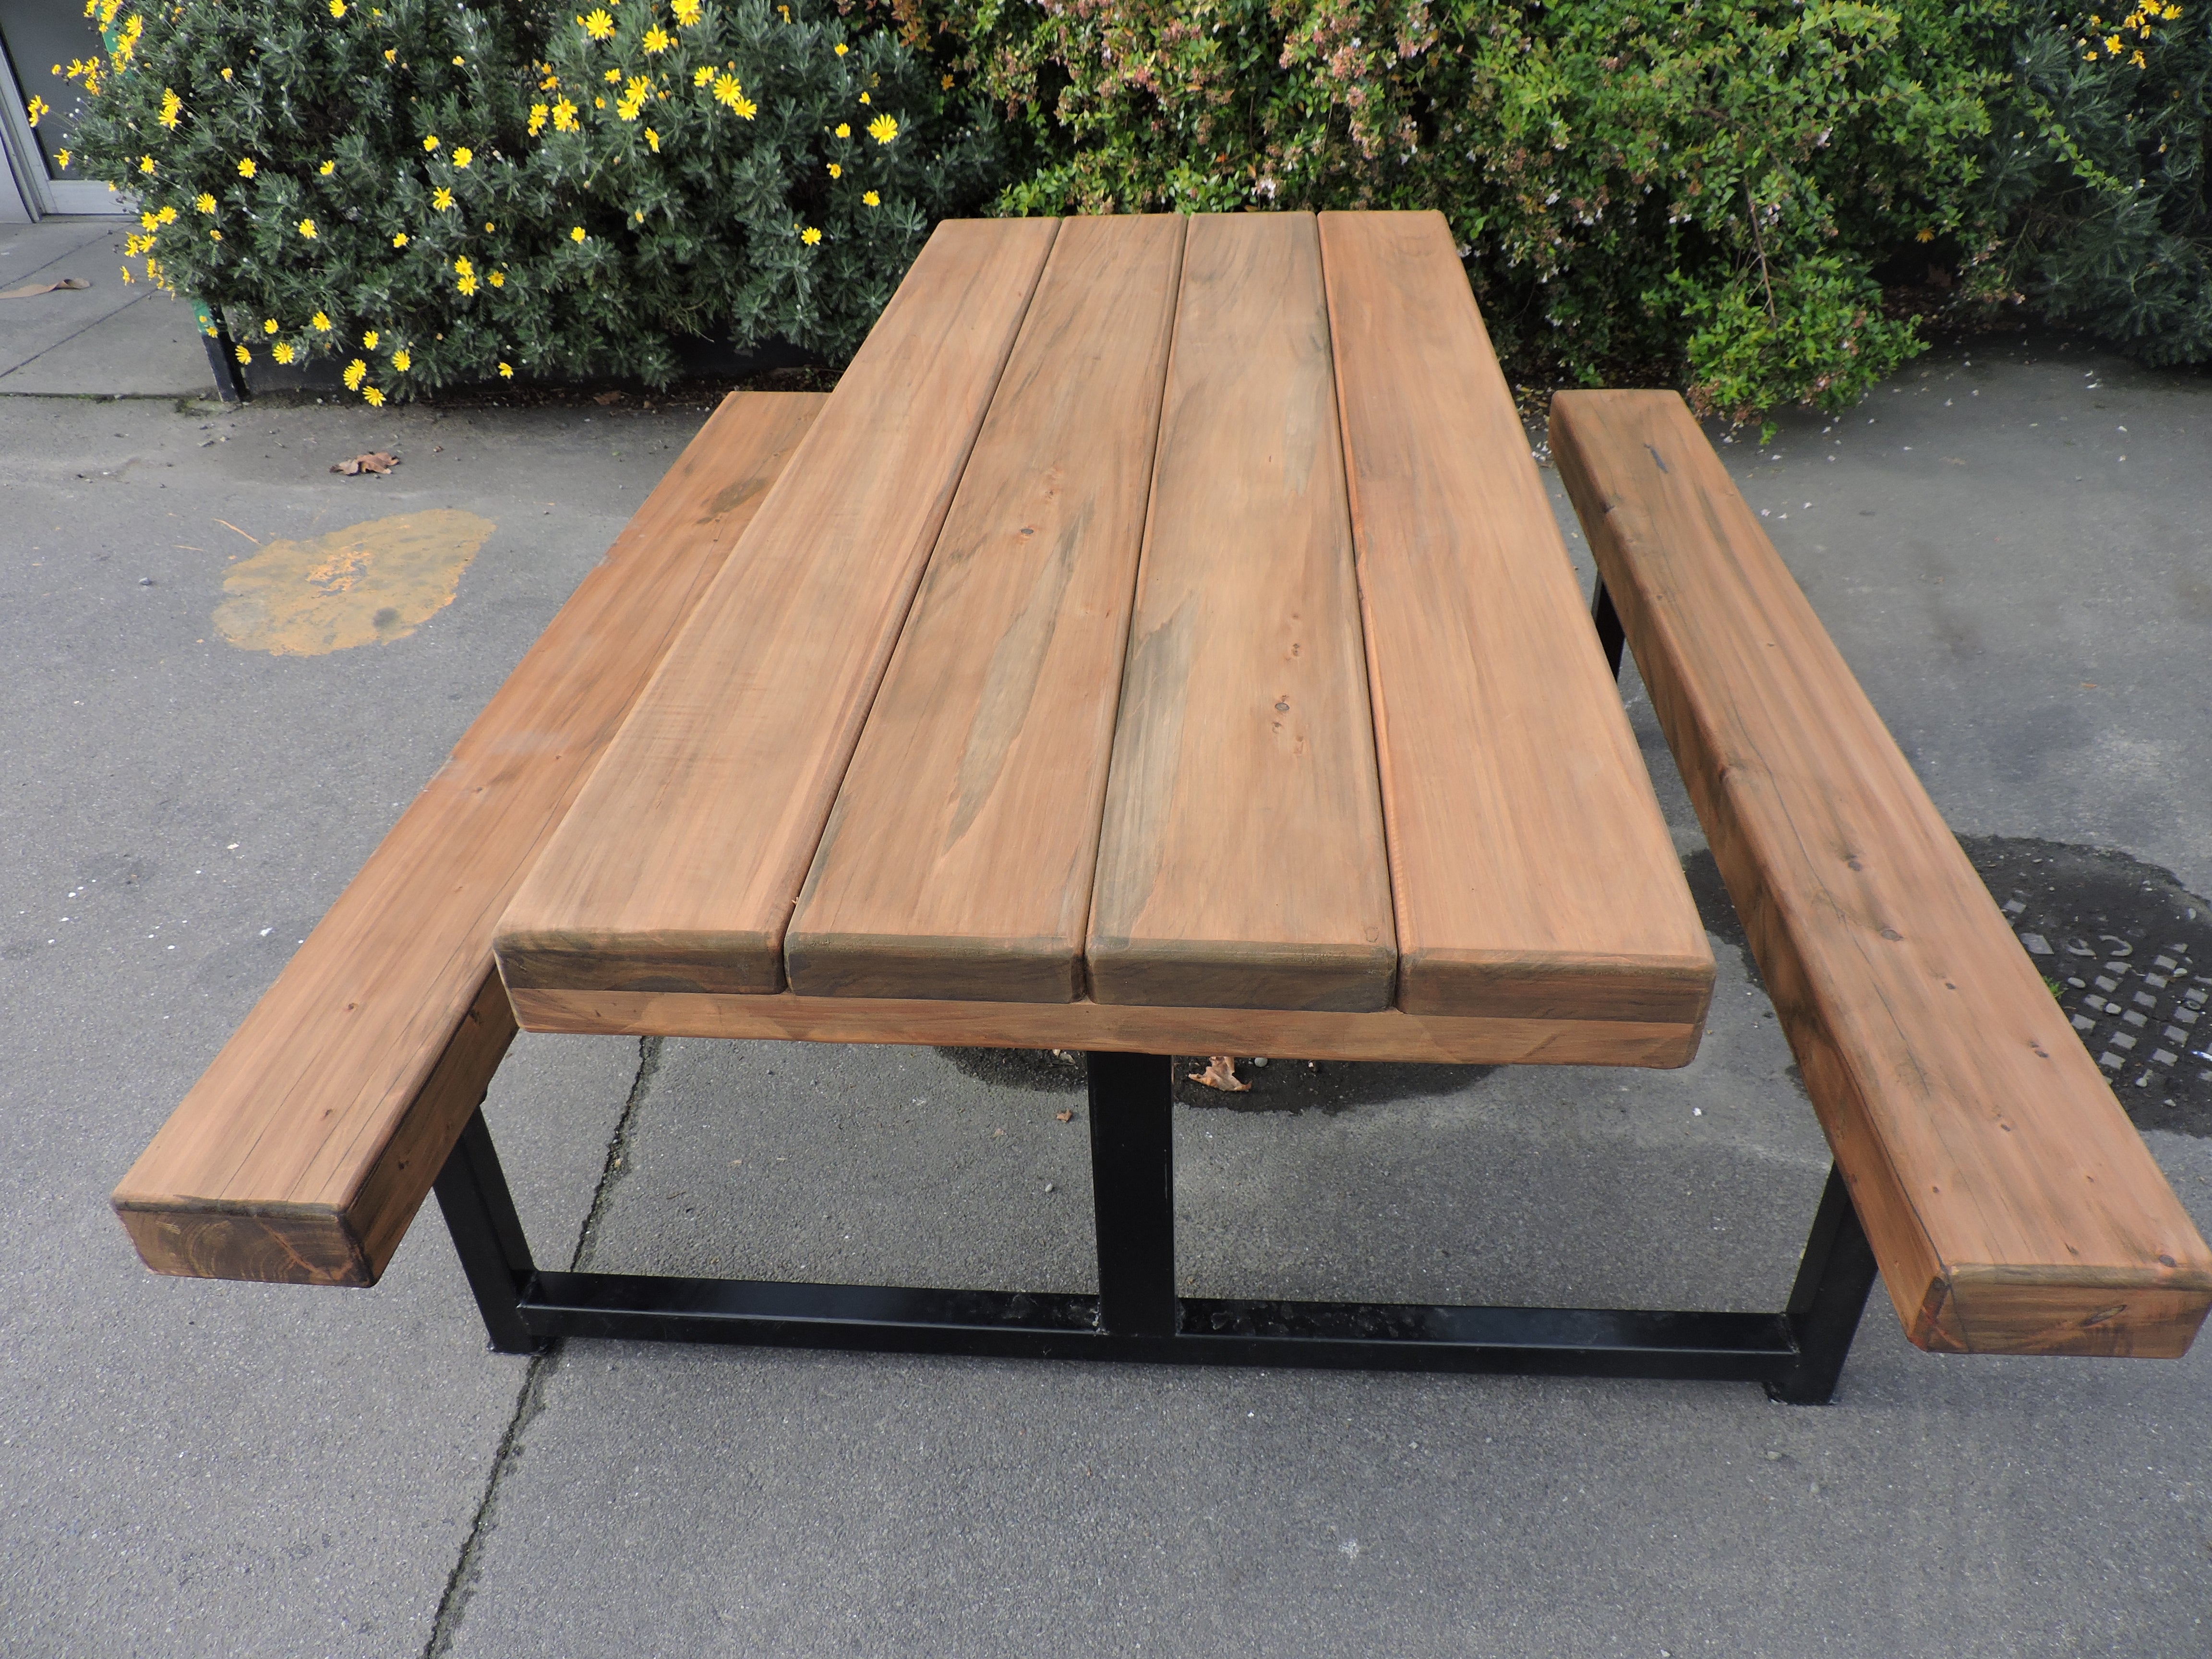 Picnic table wood and steel